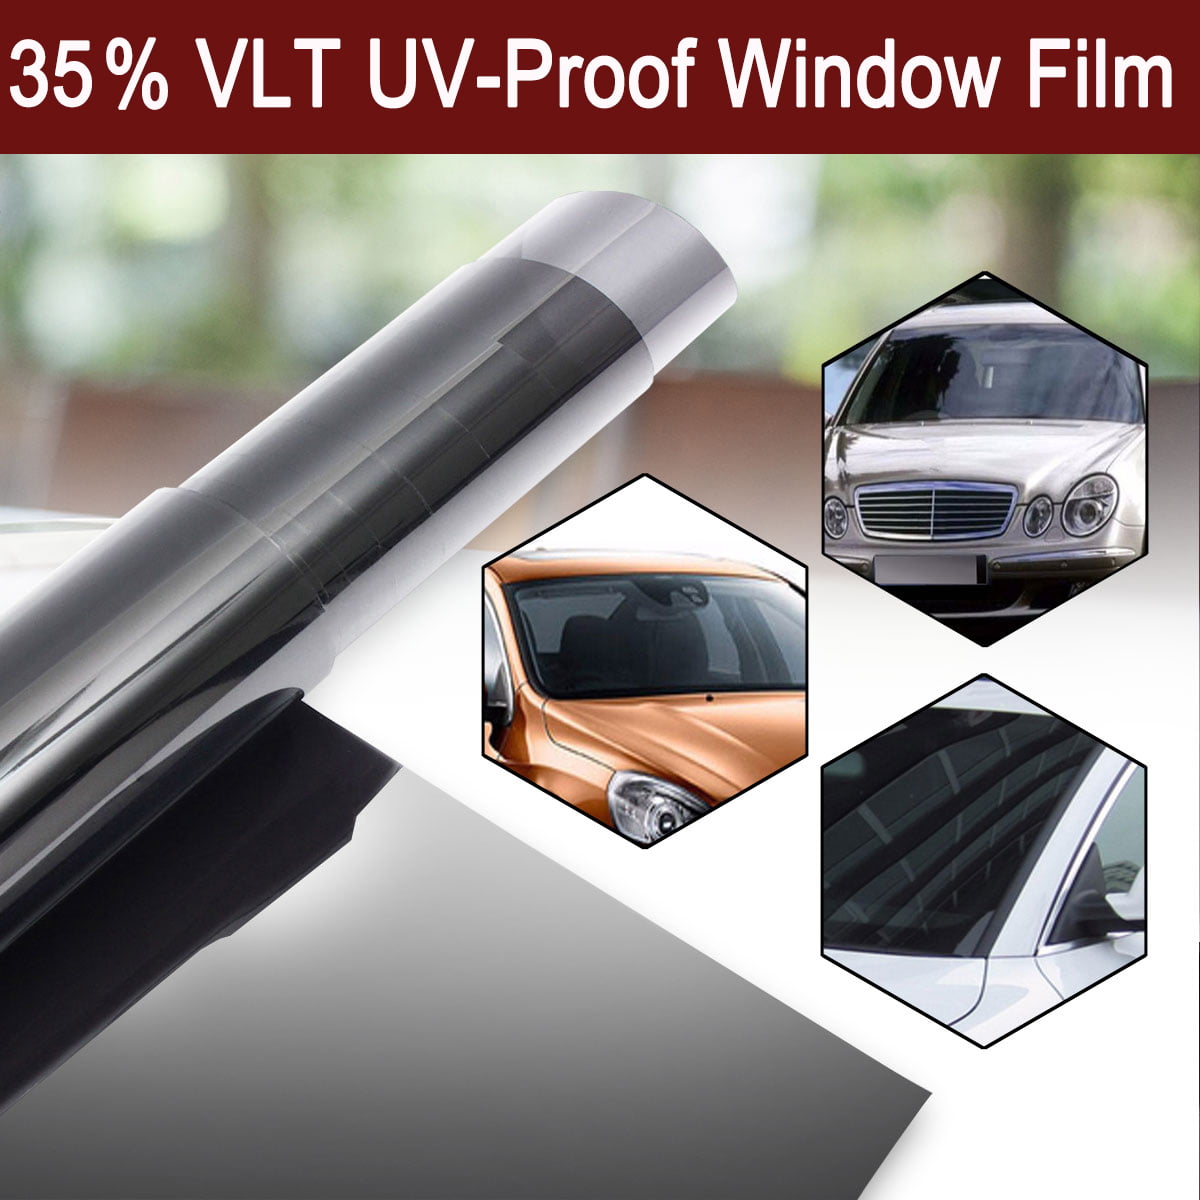 Mkbrother Uncut Roll Window Tint Film 5% VLT 36 in x 30 Ft Feet Car Home Office Glasss 